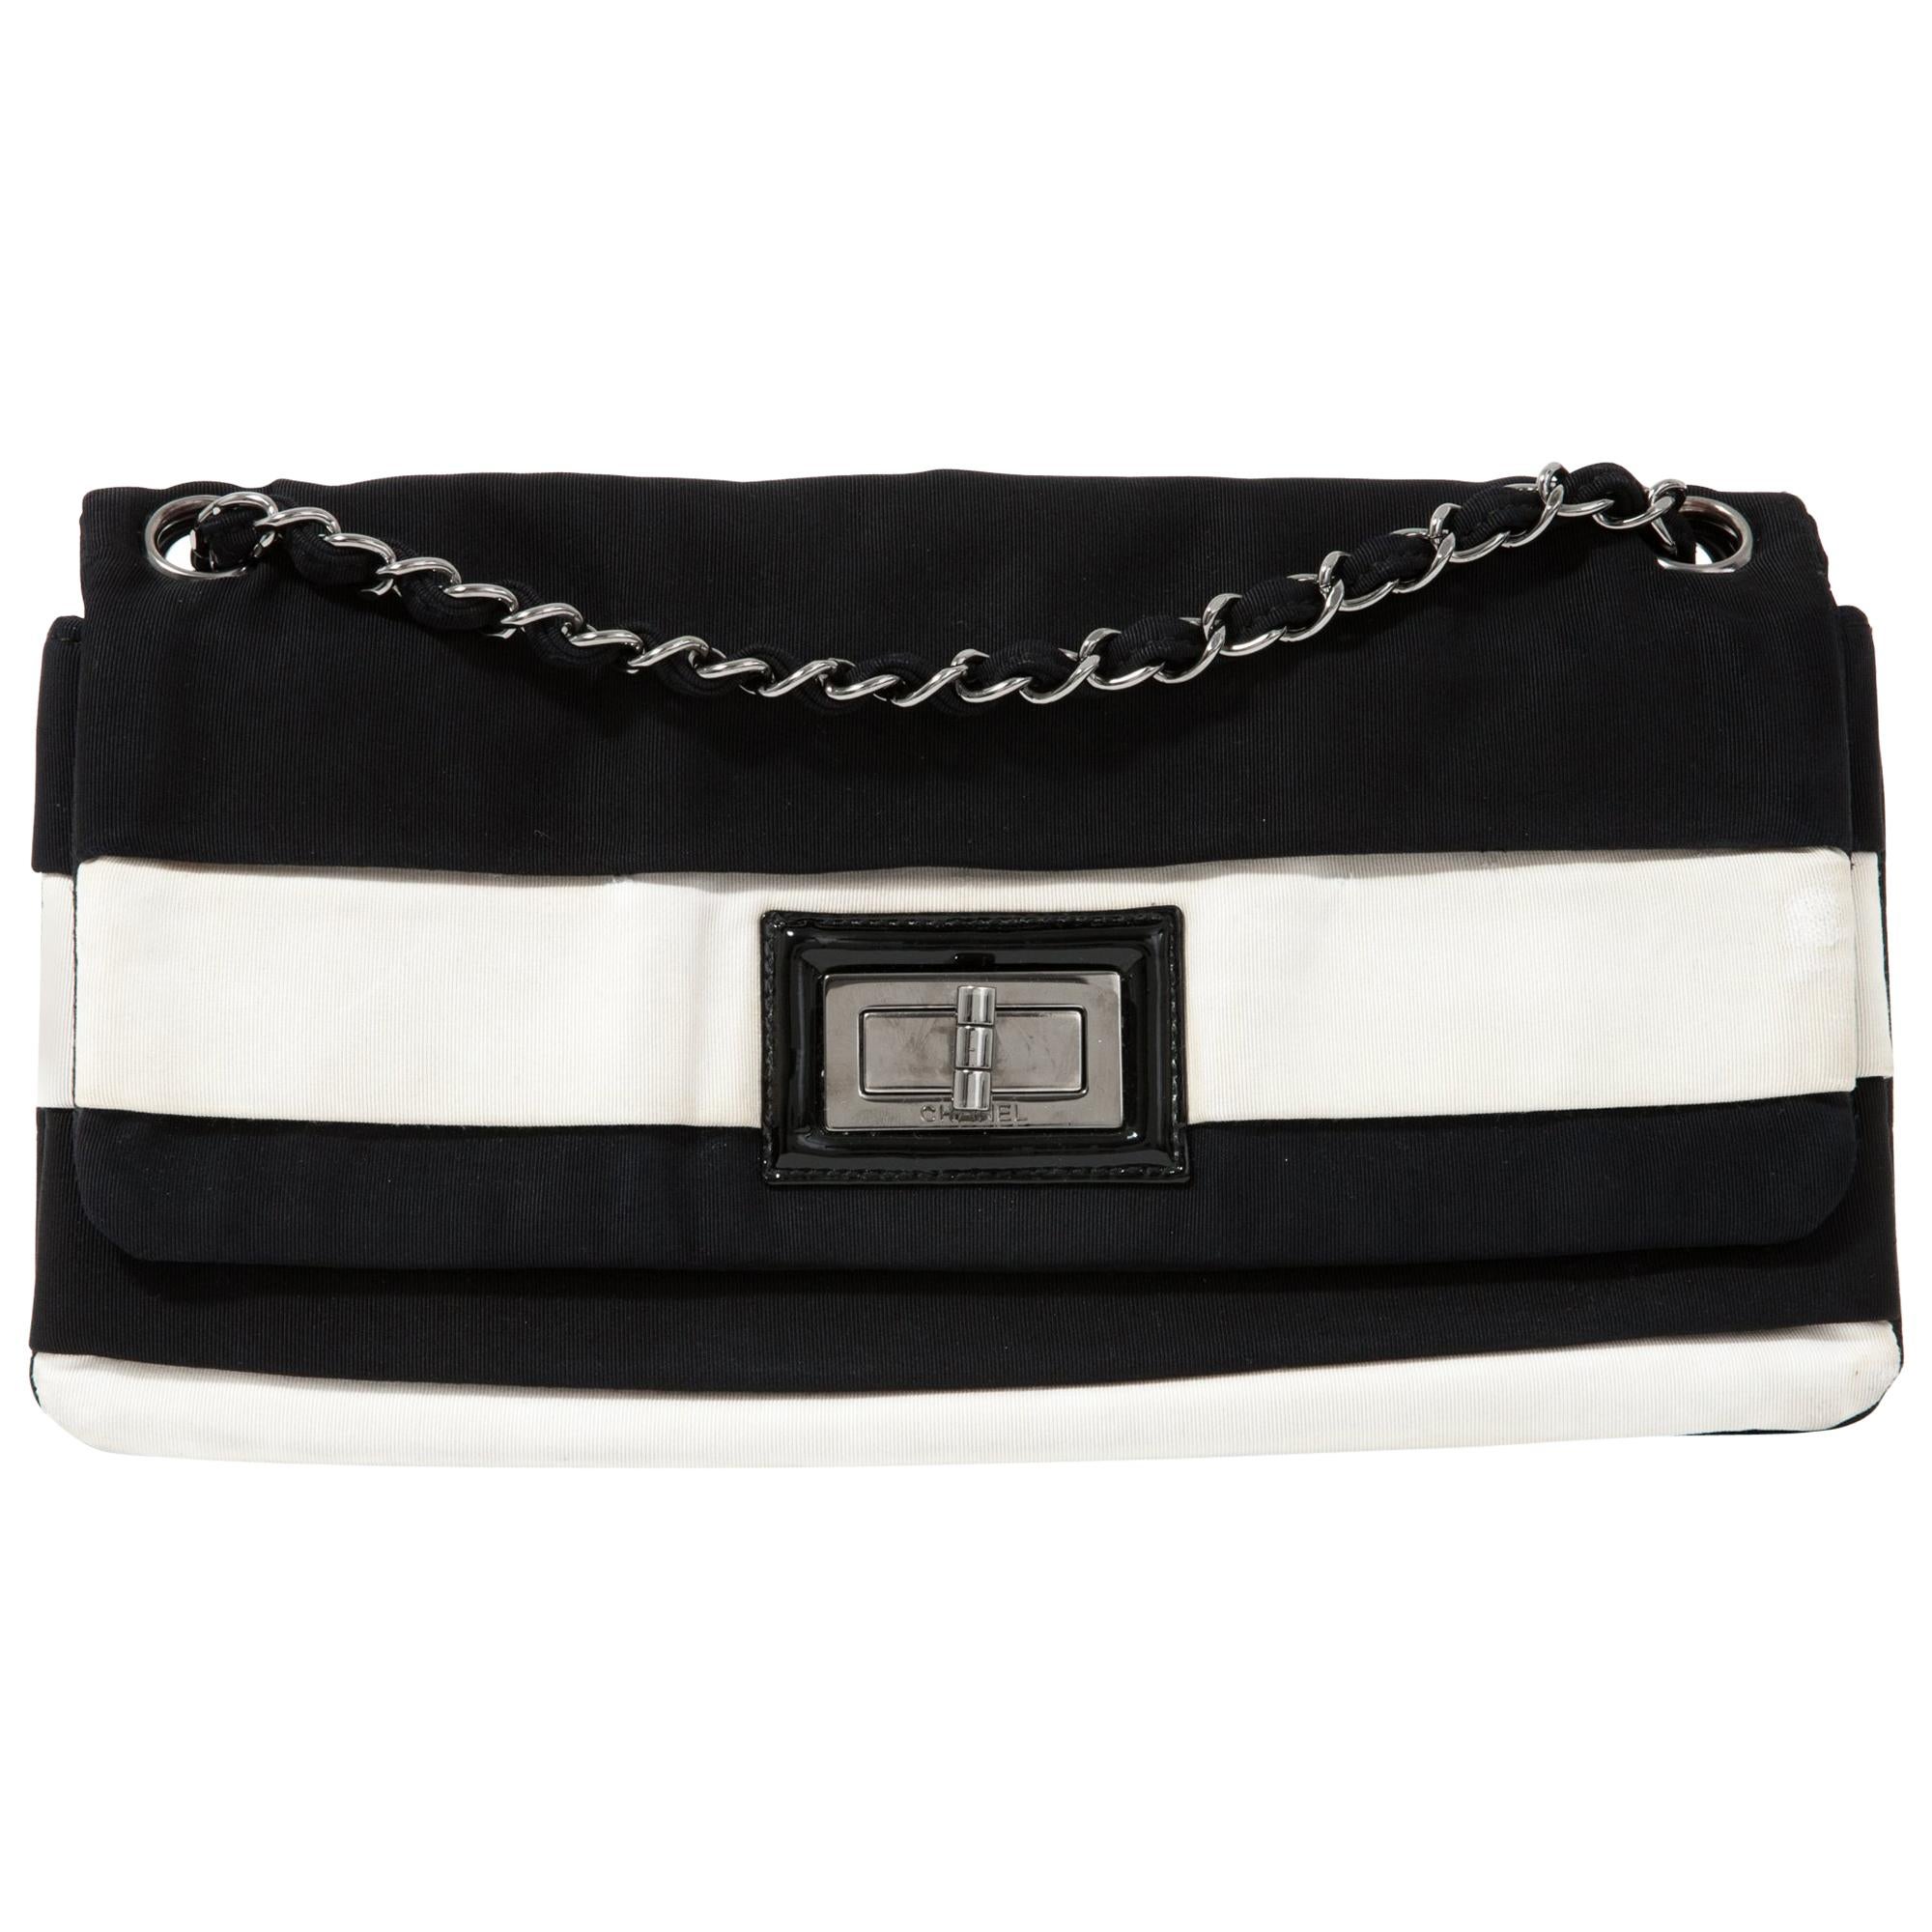 Chanel 2.55 Black and White Striped Bag